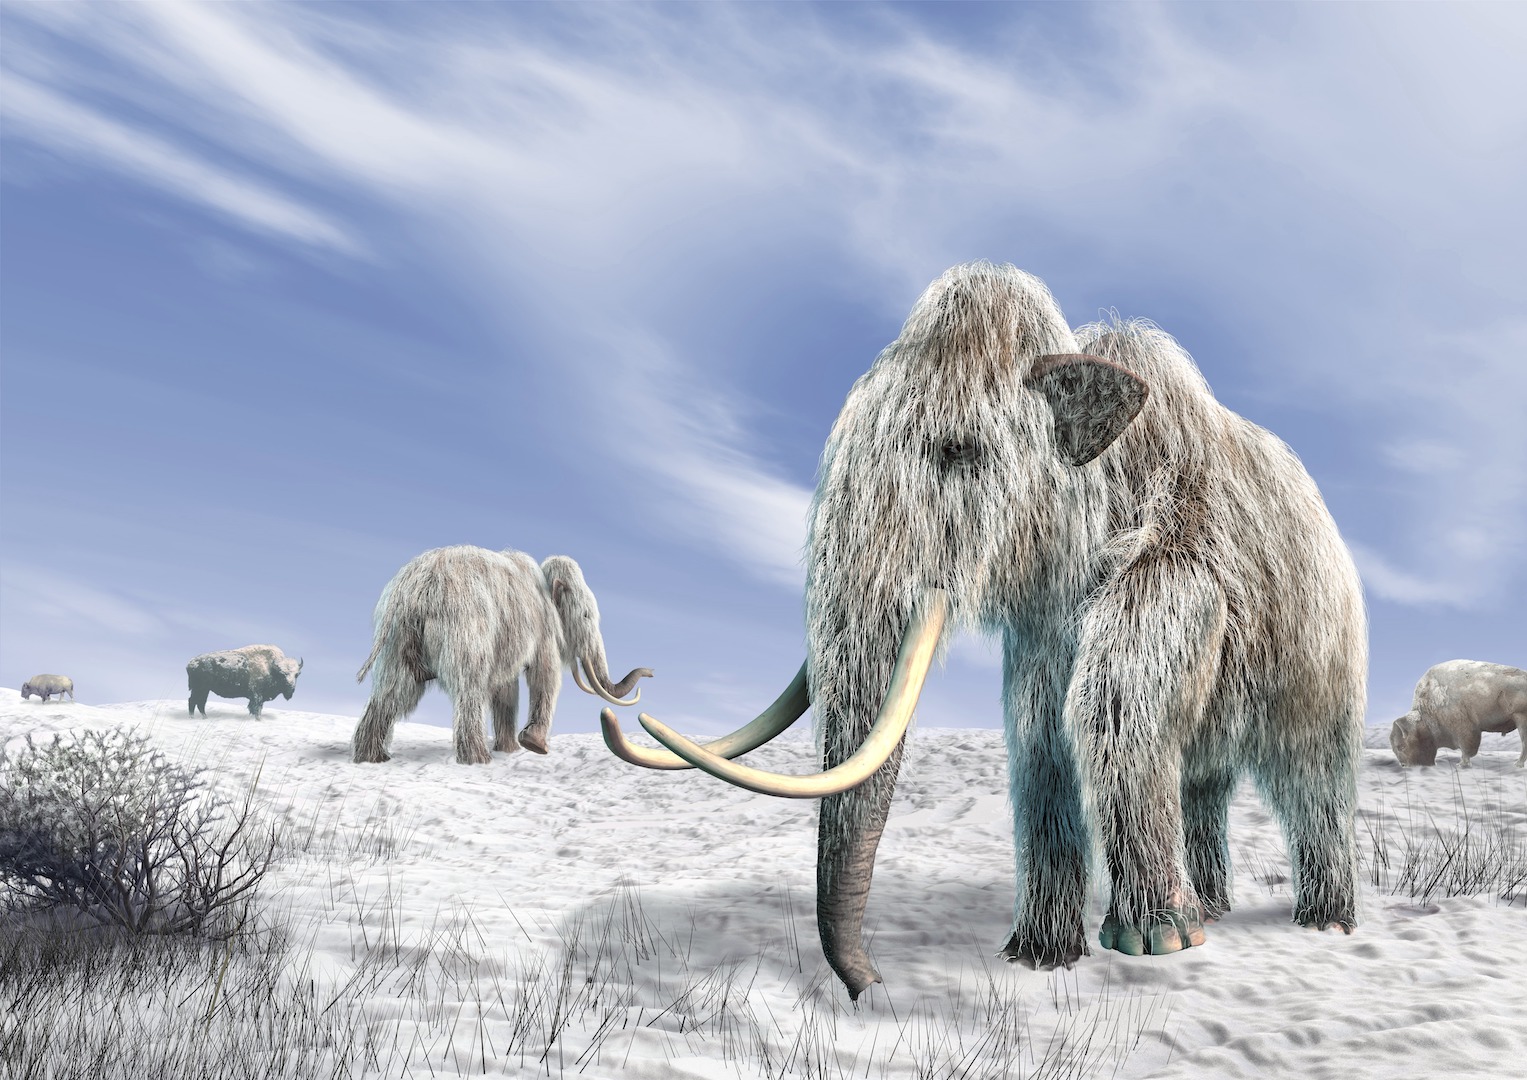 Frozen in time: 5 prehistoric creatures found trapped in ice | Live Science